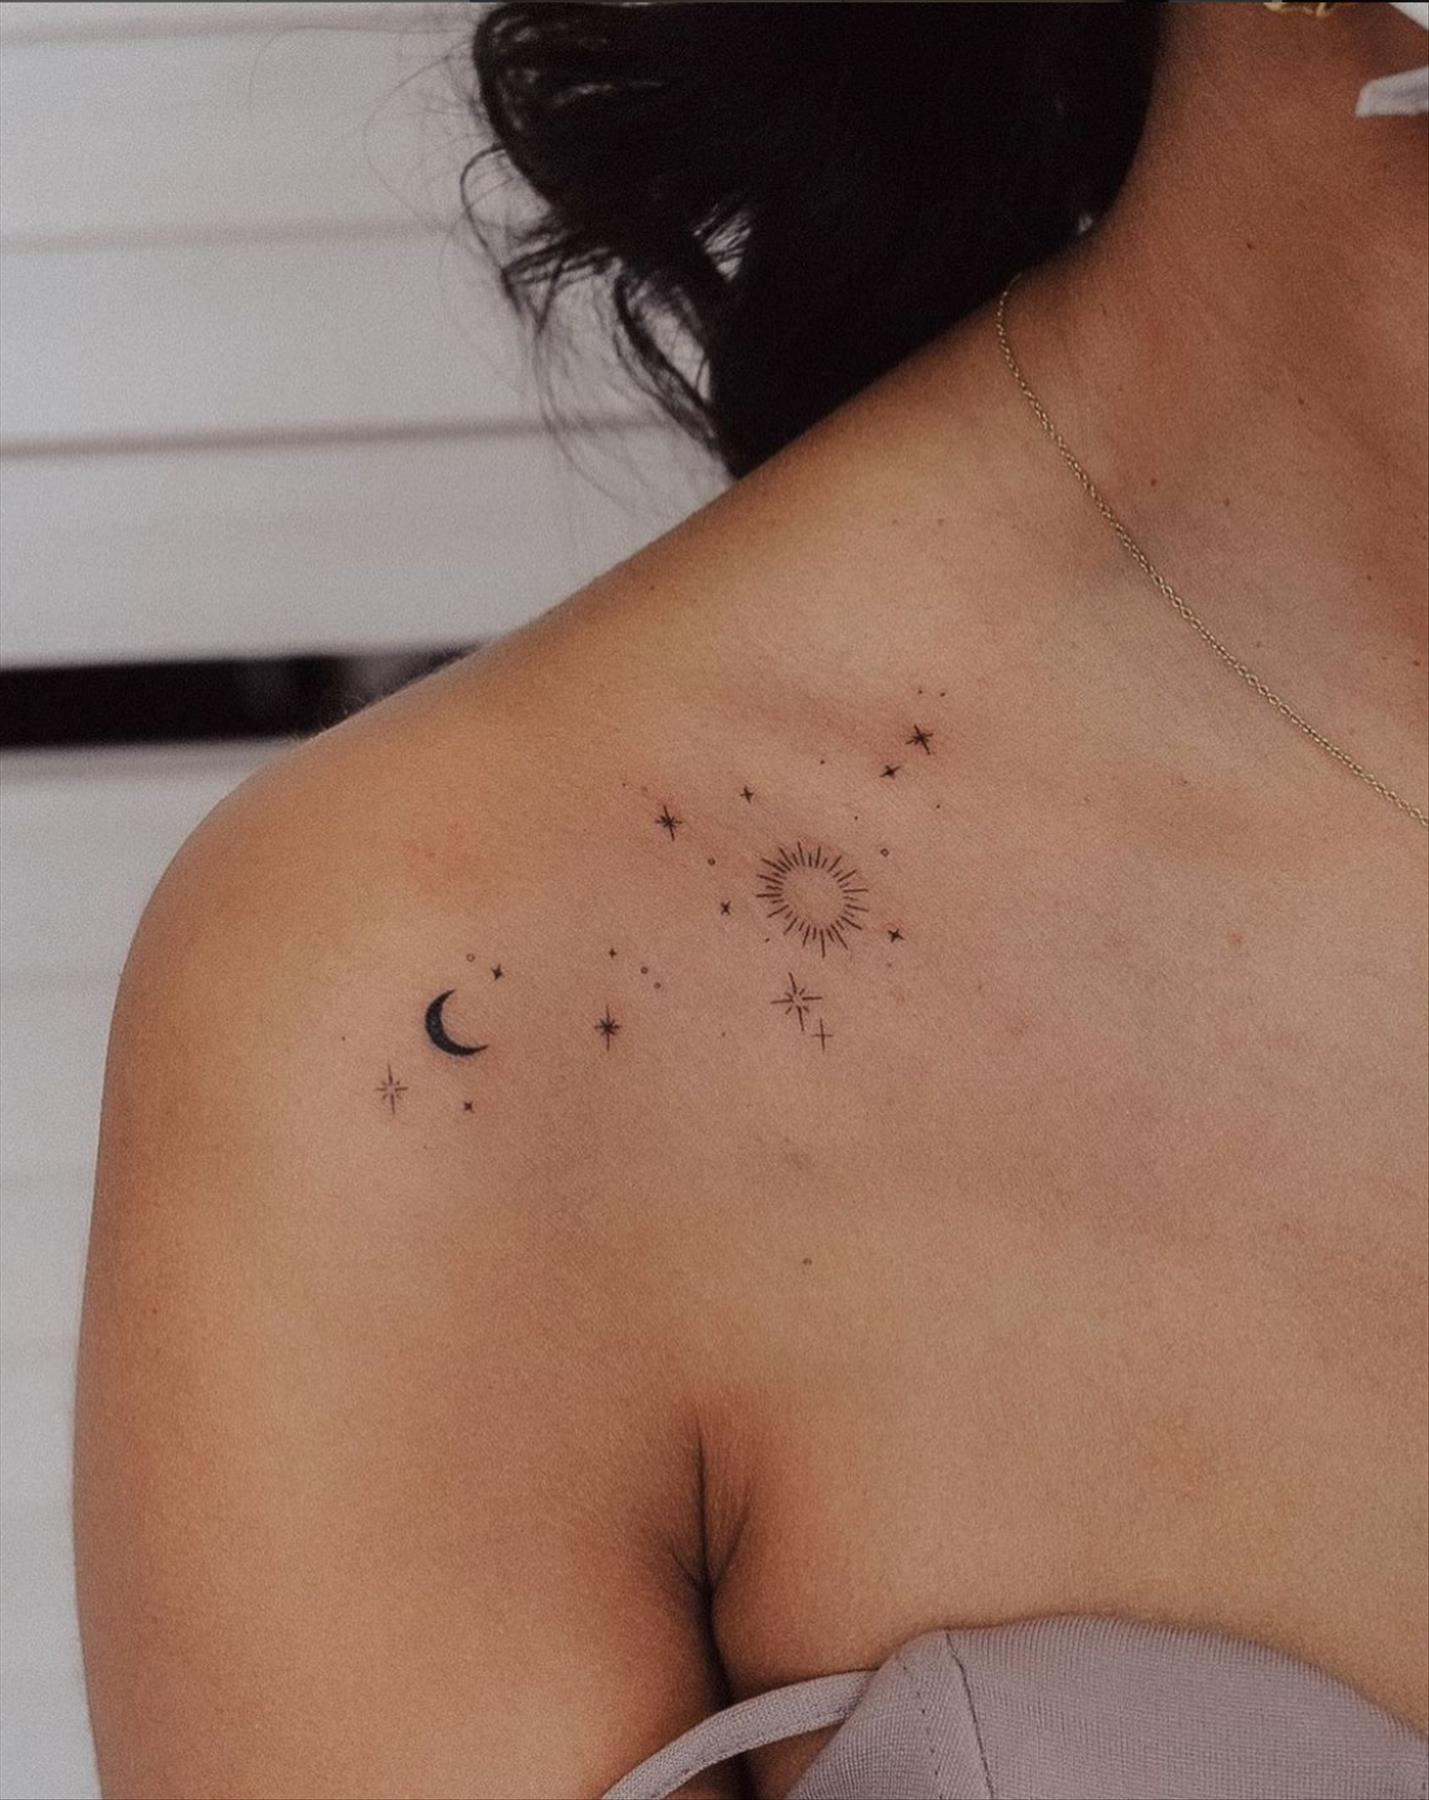 Cute small tattoo design ideas for your first tattoo attempt